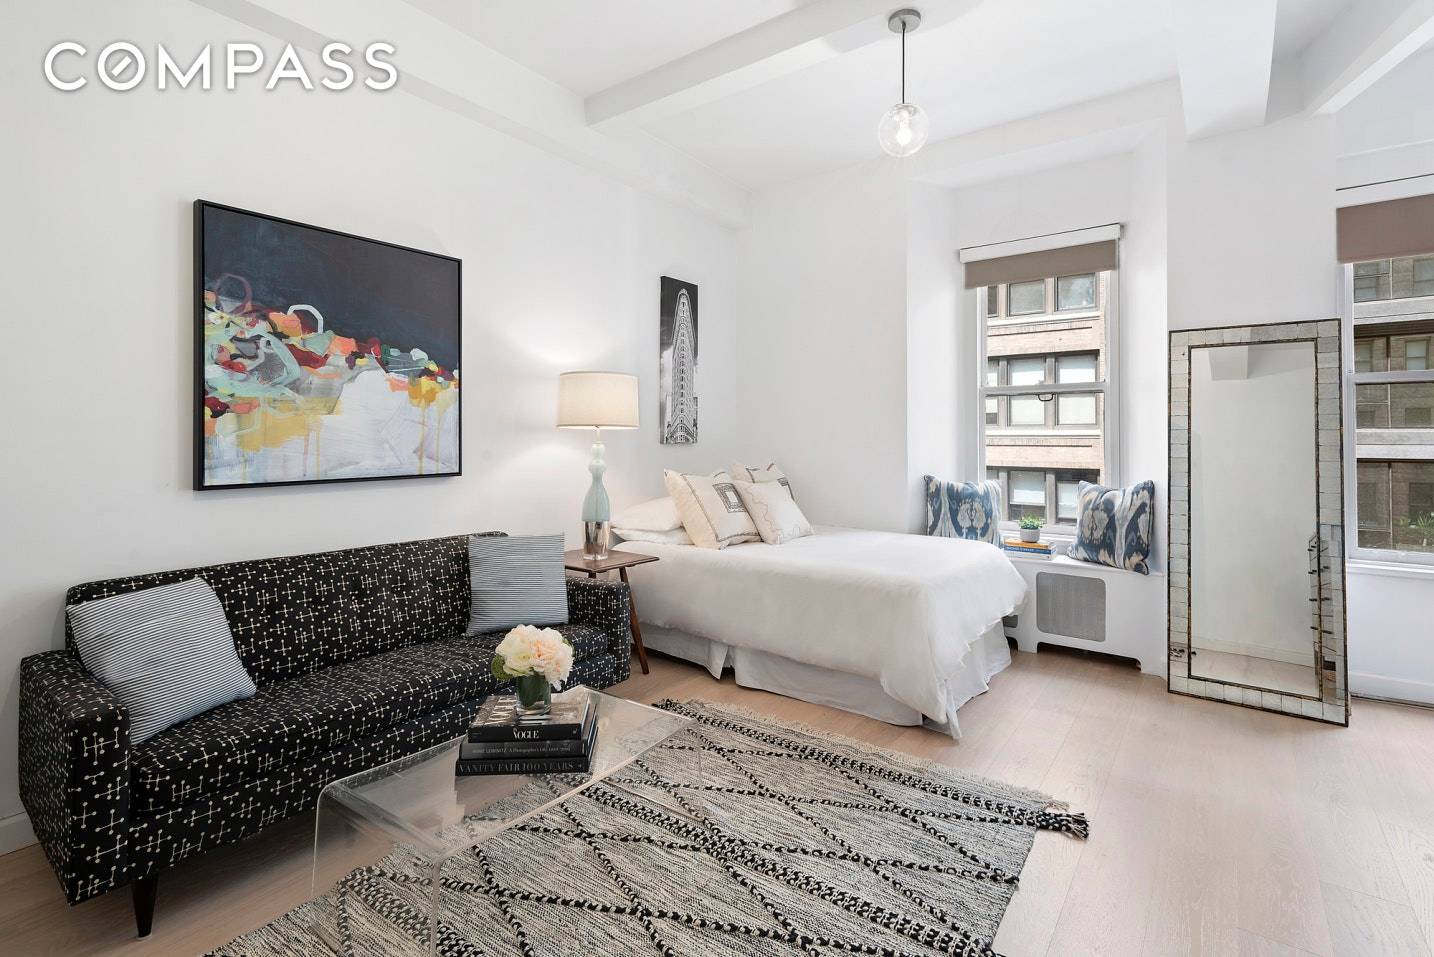 A beautifully renovated home in a landmarked historic building steps from Gramercy Park.